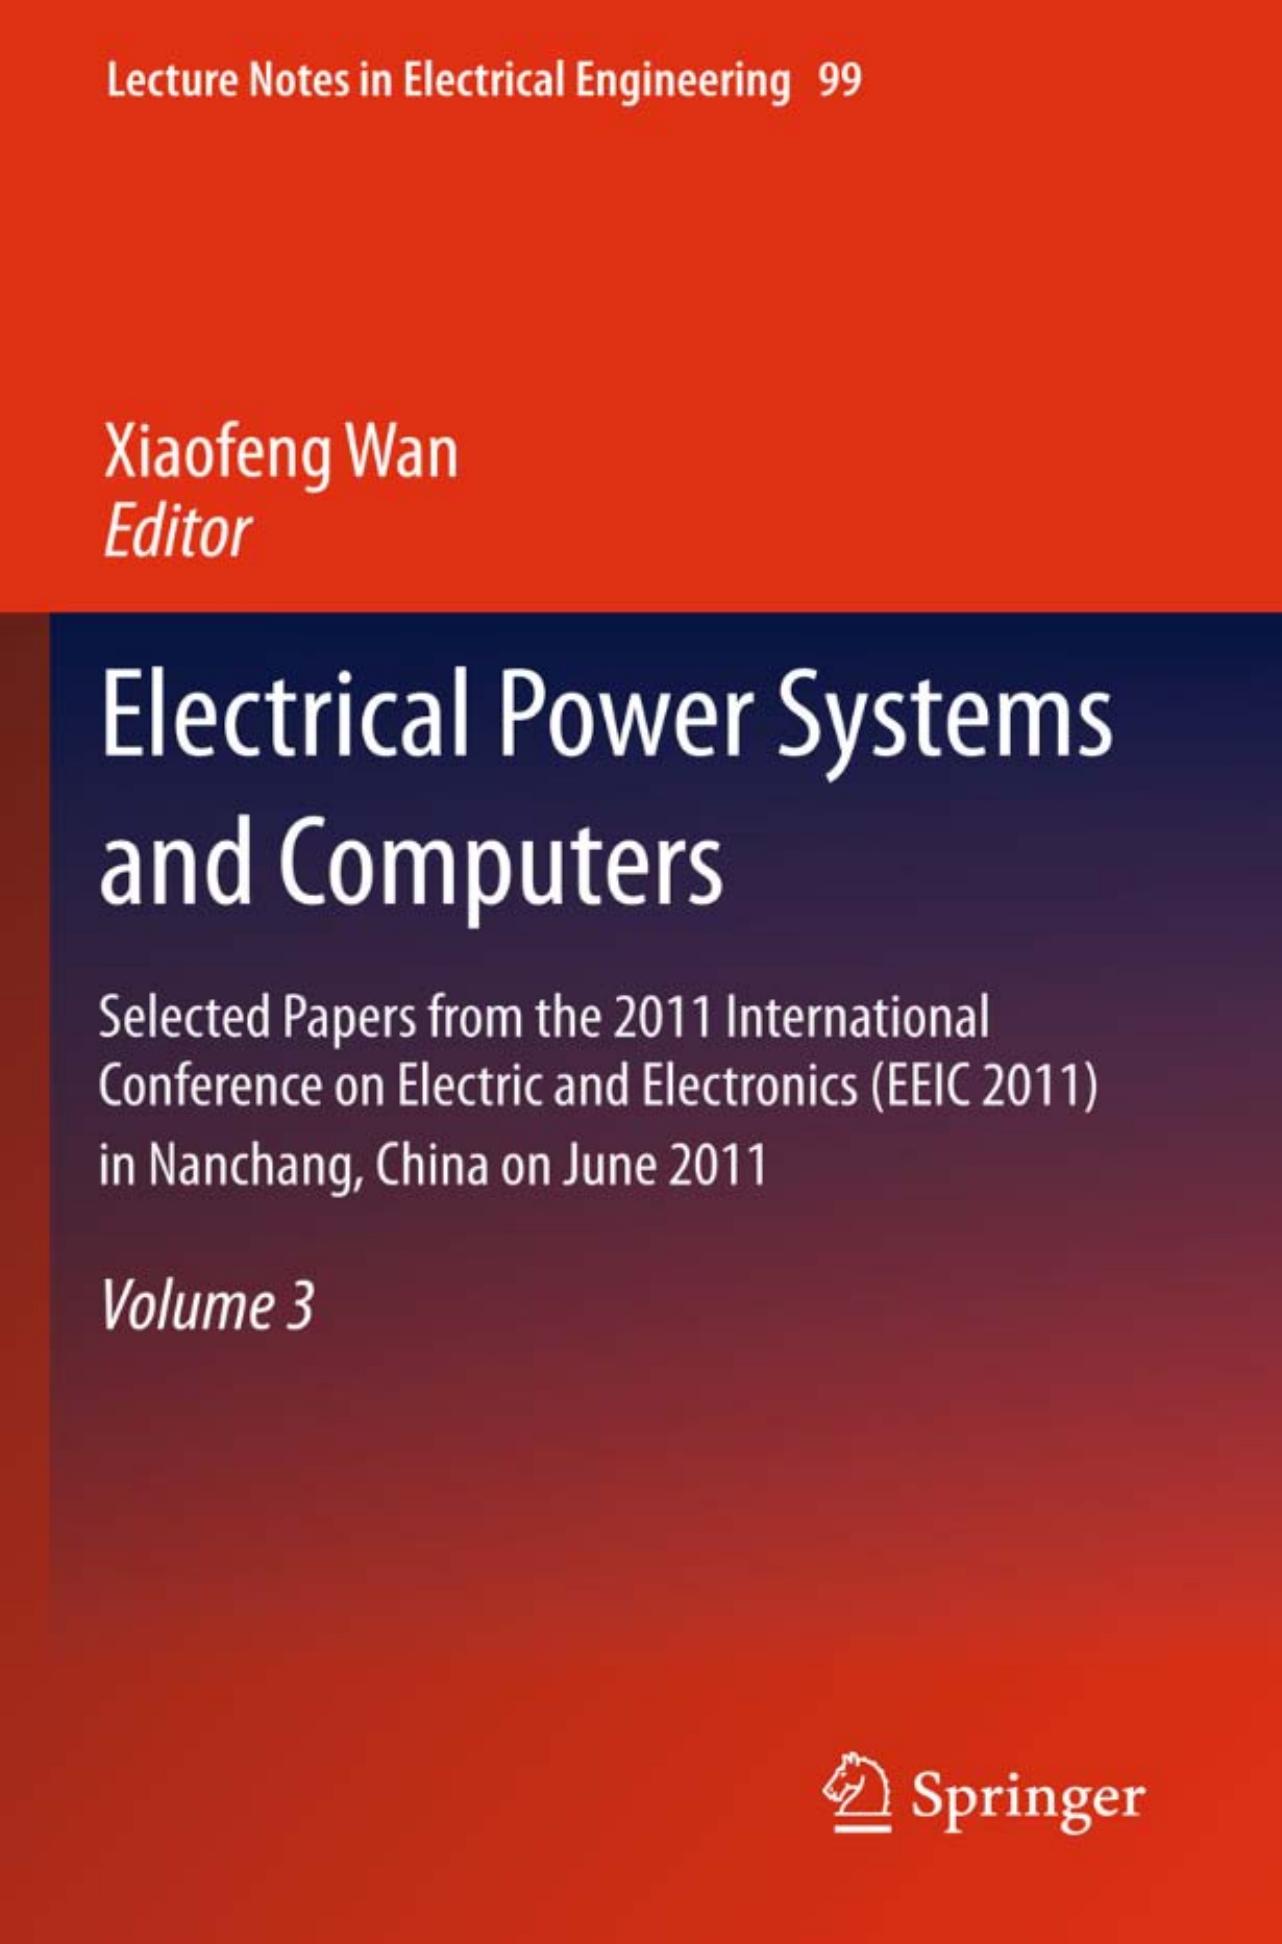 Electrical Power Systems and Computers, Volume 3 (Lecture Notes in Electrical Engineering, 99)